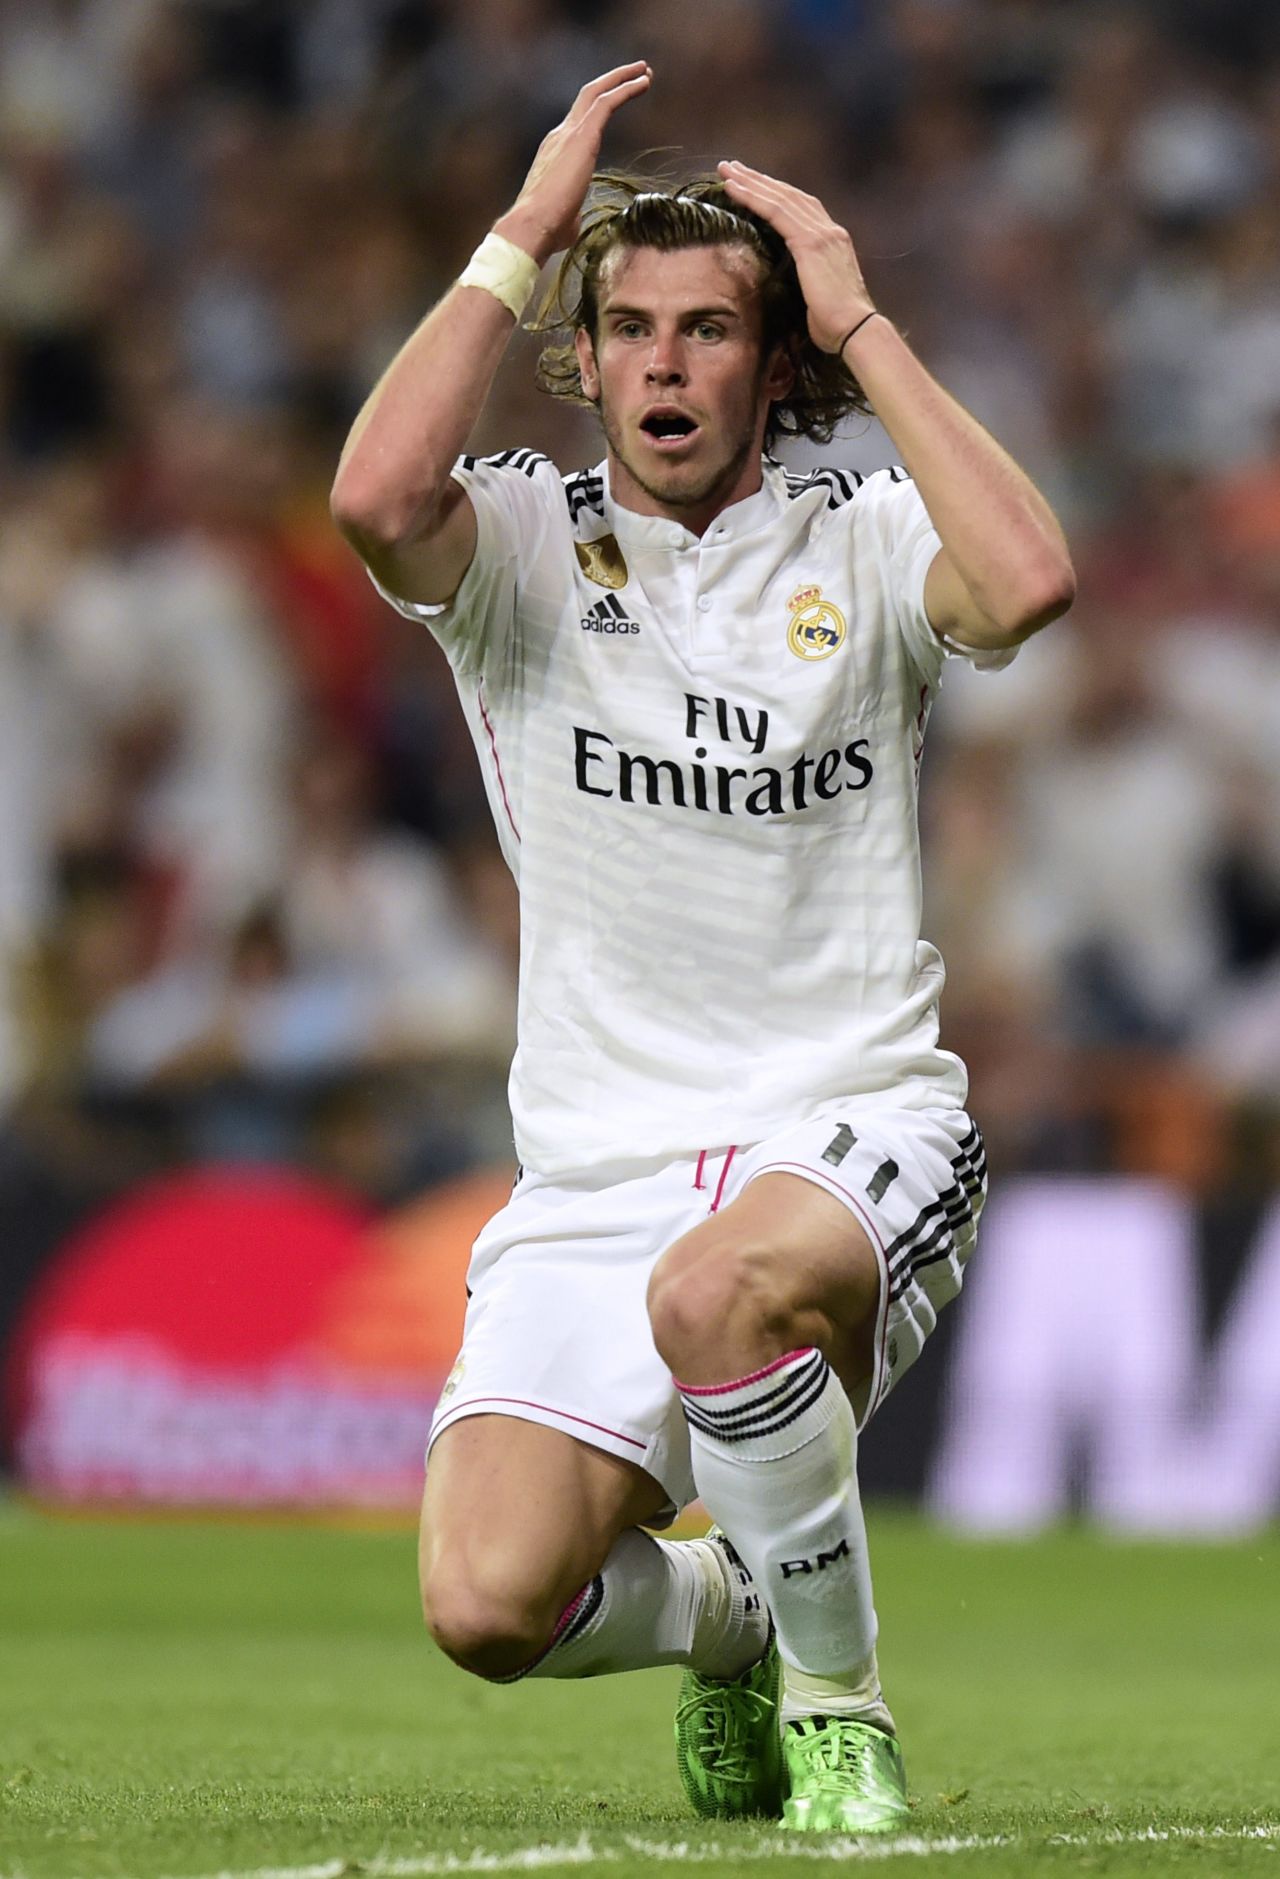 It was a frustrating night for under-pressure Bale, who has been widely targeted by Real fans this season after the club's title hopes have faltered on all fronts. 